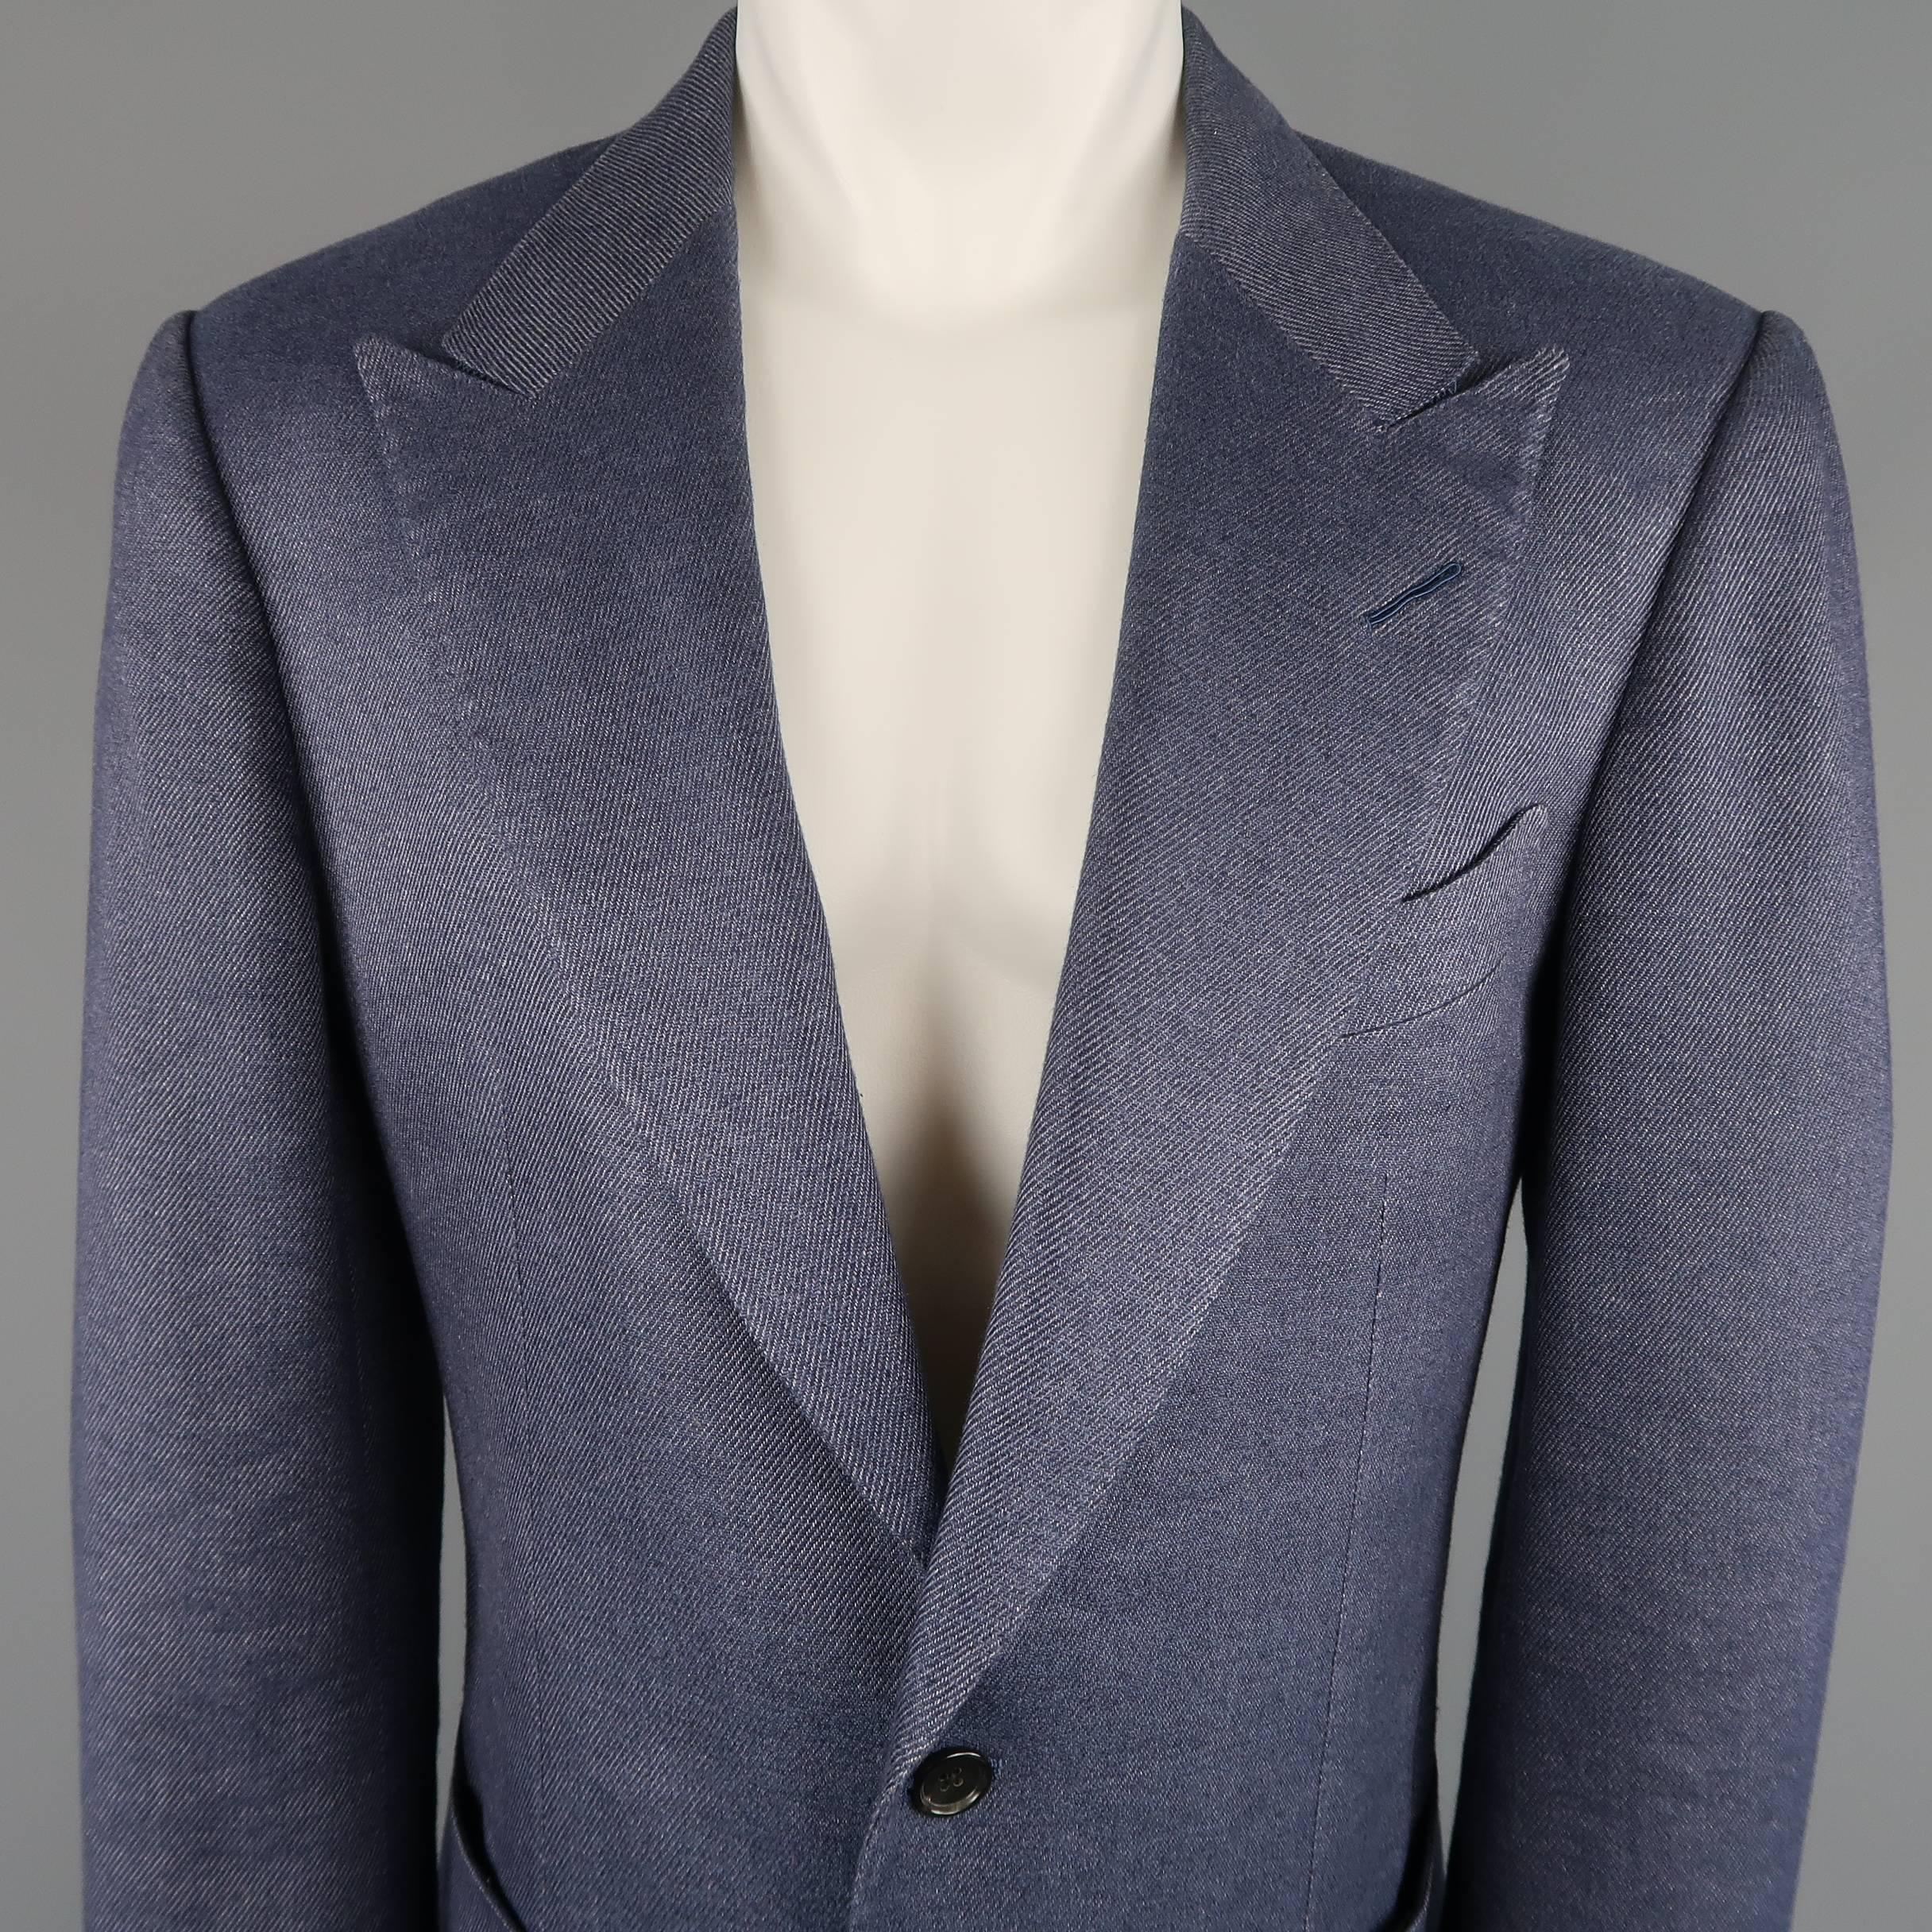 Single breasted Tom Ford sport coat comes in a light navy blue linen silk blend stripe textured material with a wide peak lapel, two button front, patch pockets and functional button cuffs. Minor wear. Made in Italy.
 
Good Pre-Owned